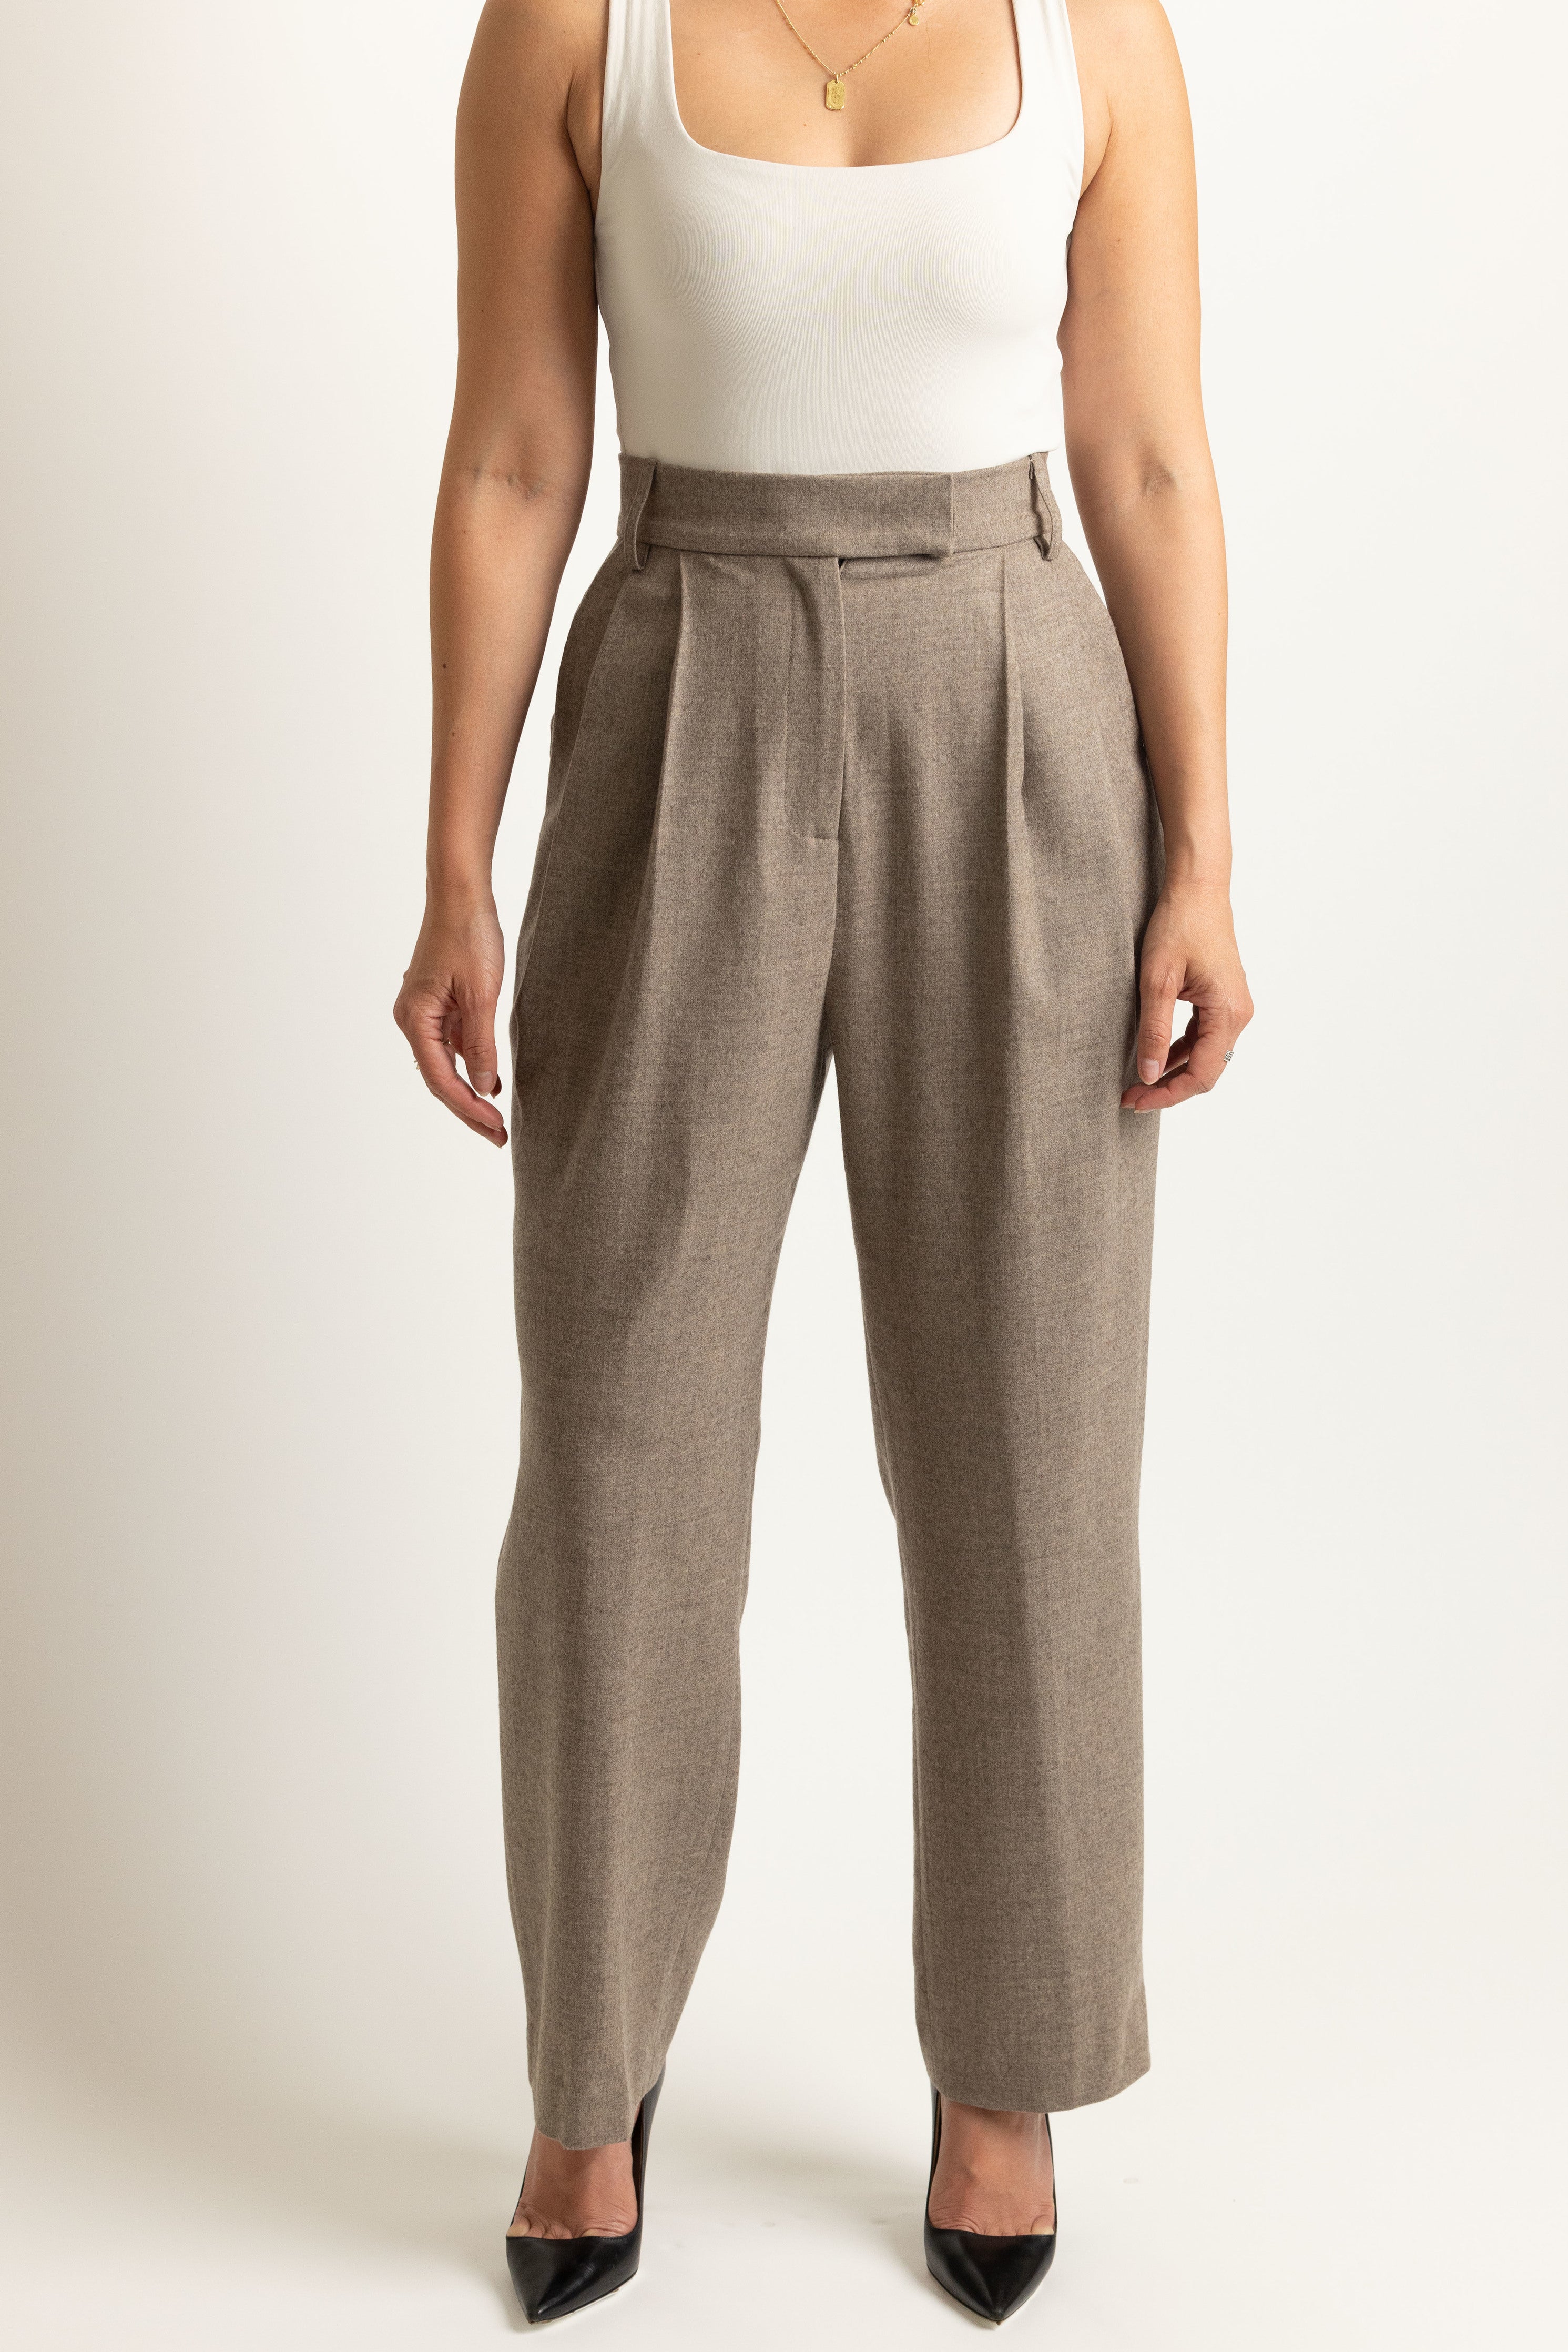 Trial Trouser in Coffee - front view